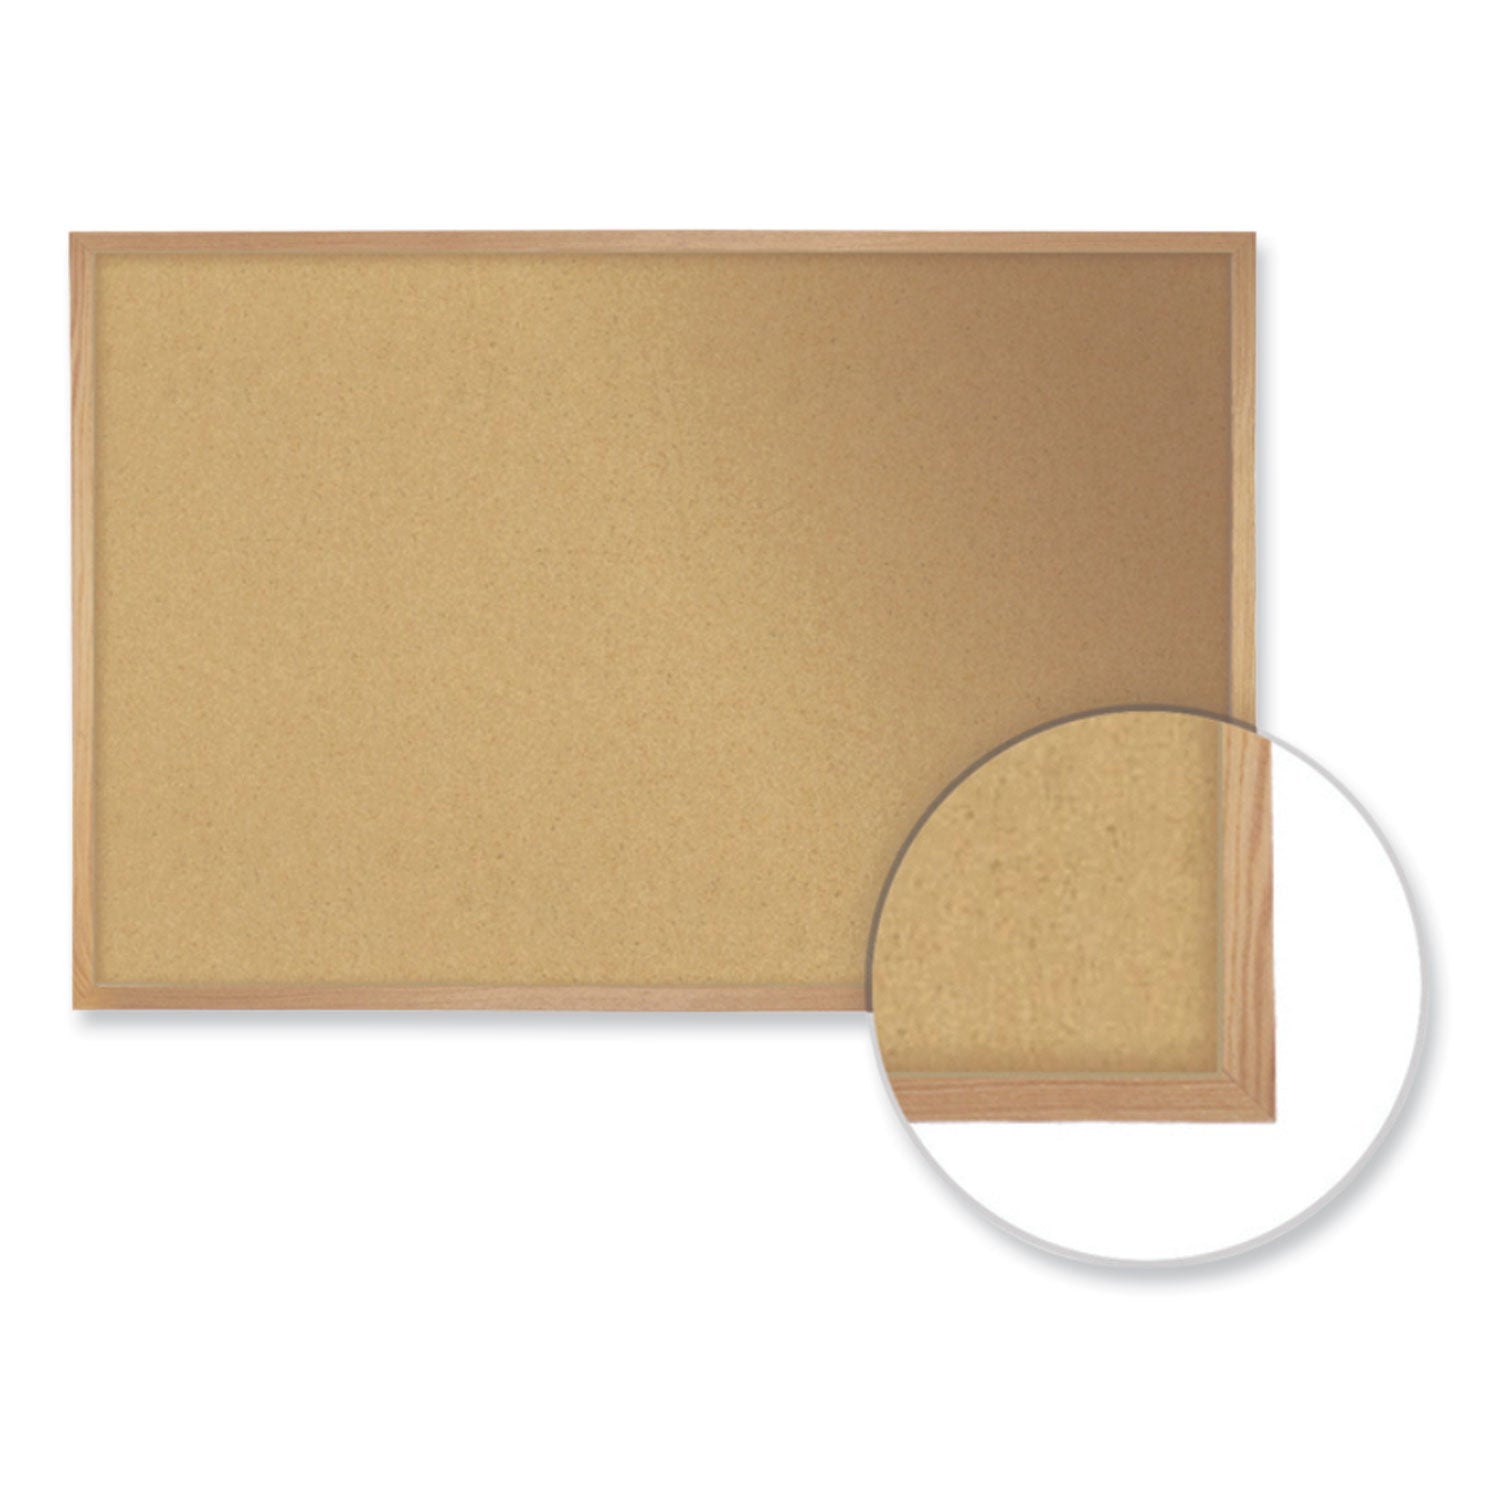 natural-cork-bulletin-board-with-frame-24-x-18-tan-surface-natural-oak-frame-ships-in-7-10-business-days_ghe14181 - 3